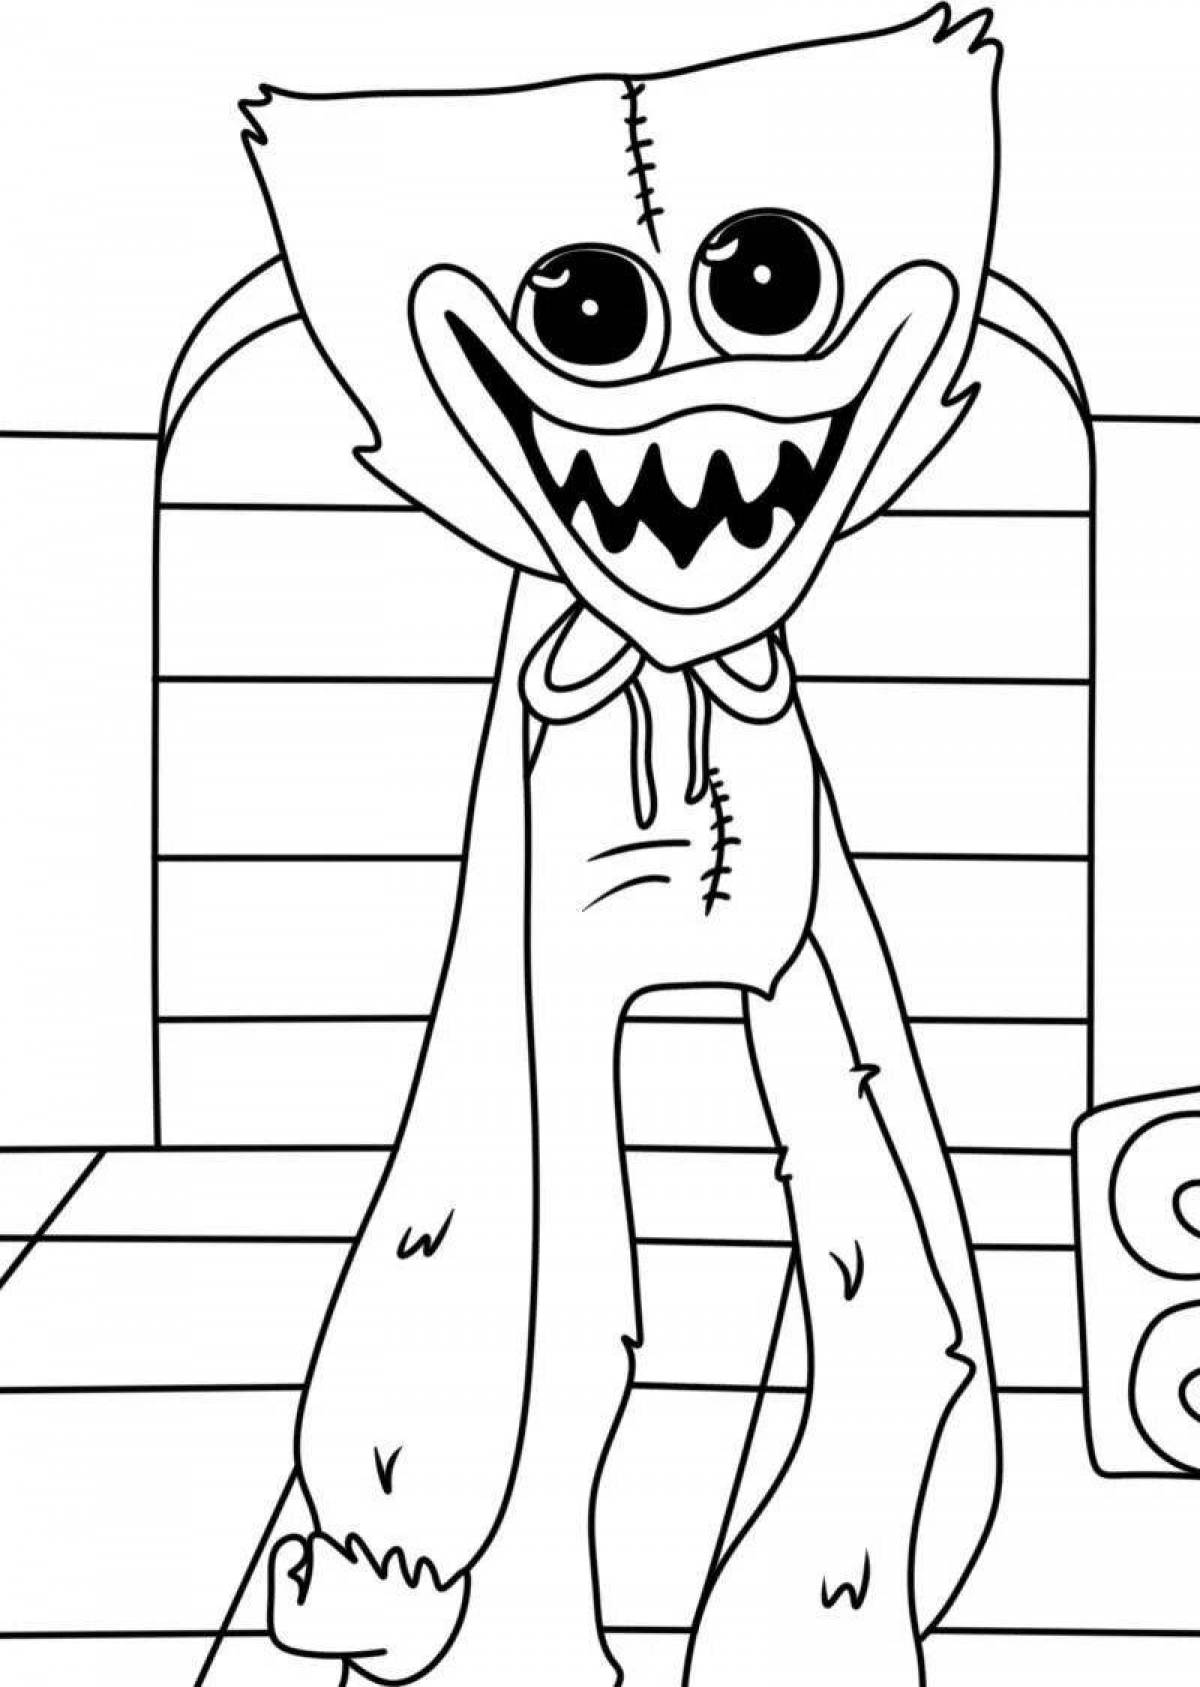 Exciting drink coloring page while playing